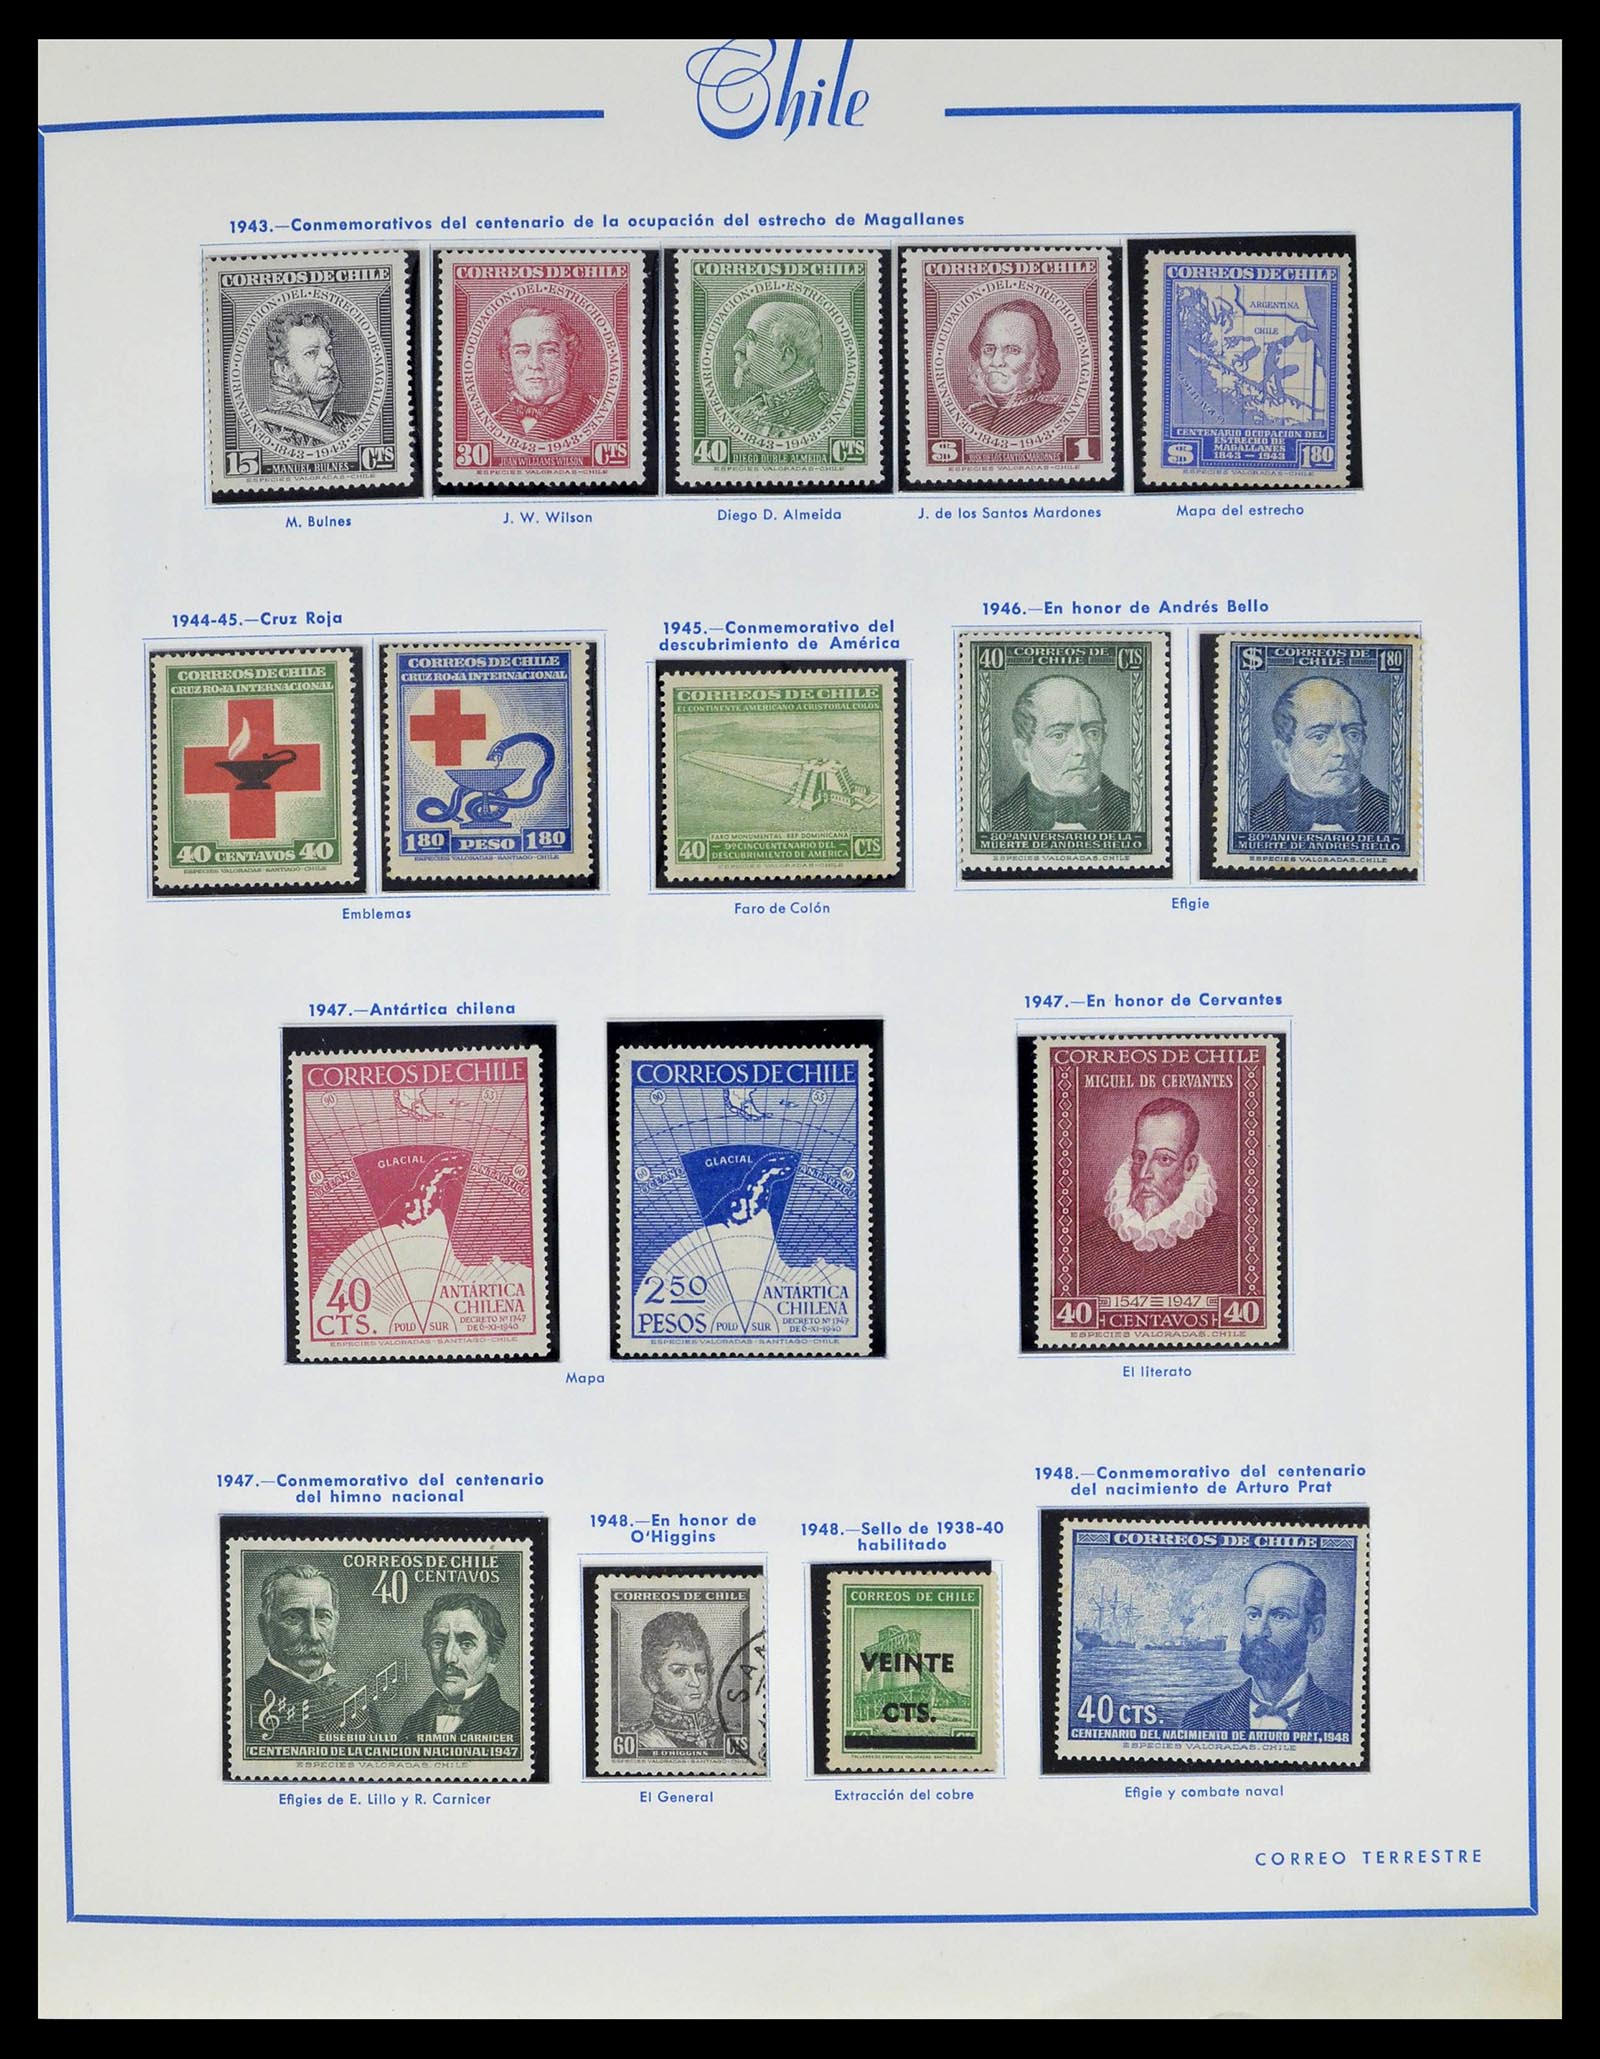 39213 0013 - Stamp collection 39213 Chile 1853-1970.